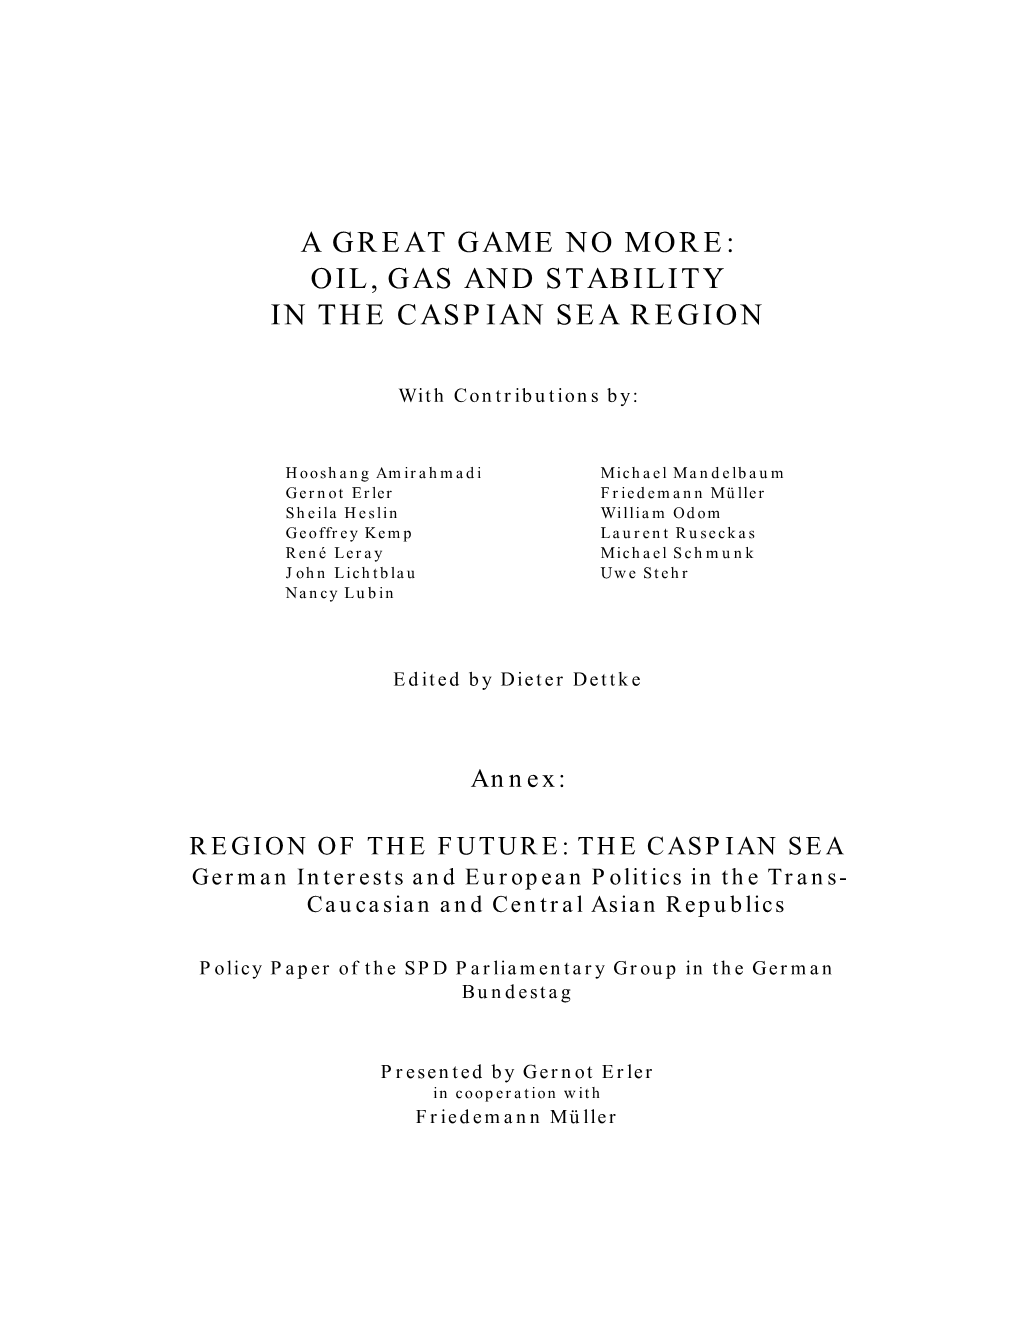 A Great Game No More: Oil, Gas and Stability in the Caspian Sea Region